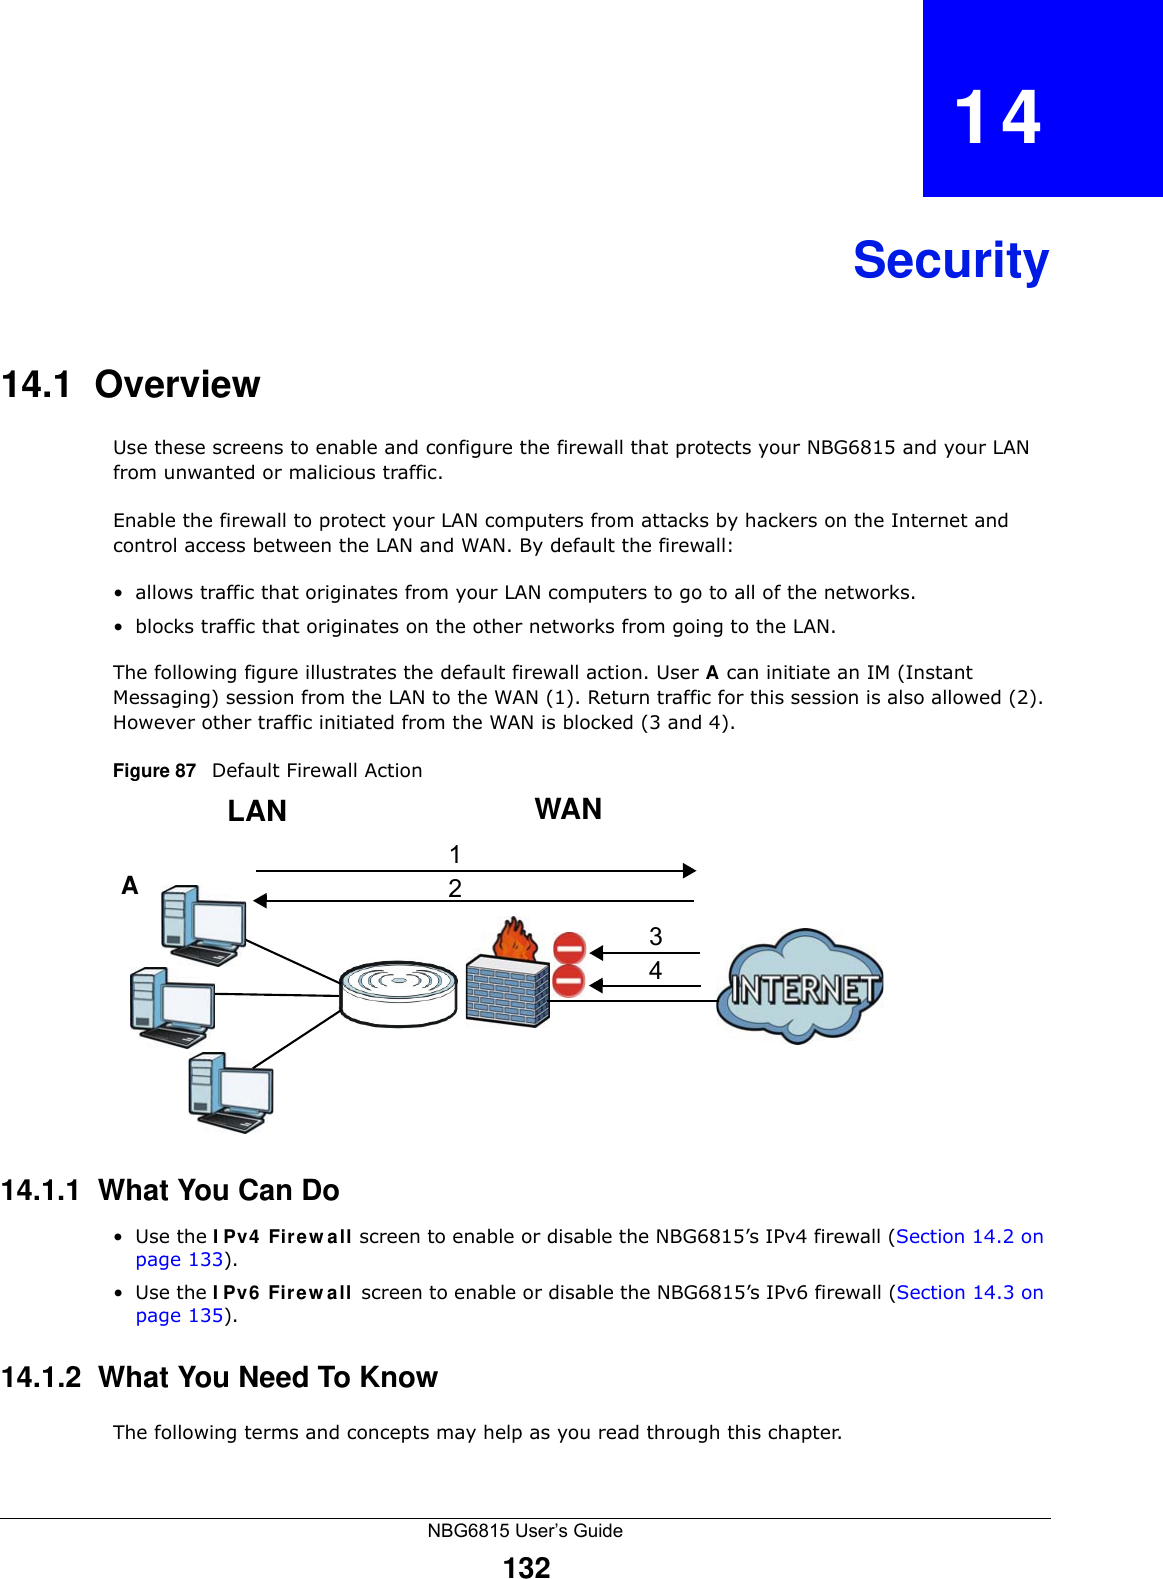 NBG6815 User’s Guide132CHAPTER   14Security14.1  Overview   Use these screens to enable and configure the firewall that protects your NBG6815 and your LAN from unwanted or malicious traffic.Enable the firewall to protect your LAN computers from attacks by hackers on the Internet and control access between the LAN and WAN. By default the firewall:• allows traffic that originates from your LAN computers to go to all of the networks. • blocks traffic that originates on the other networks from going to the LAN. The following figure illustrates the default firewall action. User A can initiate an IM (Instant Messaging) session from the LAN to the WAN (1). Return traffic for this session is also allowed (2). However other traffic initiated from the WAN is blocked (3 and 4).Figure 87   Default Firewall Action14.1.1  What You Can Do•Use the IPv4 Firewall screen to enable or disable the NBG6815’s IPv4 firewall (Section 14.2 on page 133).•Use the IPv6 Firewall screen to enable or disable the NBG6815’s IPv6 firewall (Section 14.3 on page 135).14.1.2  What You Need To KnowThe following terms and concepts may help as you read through this chapter.WANLAN3412A